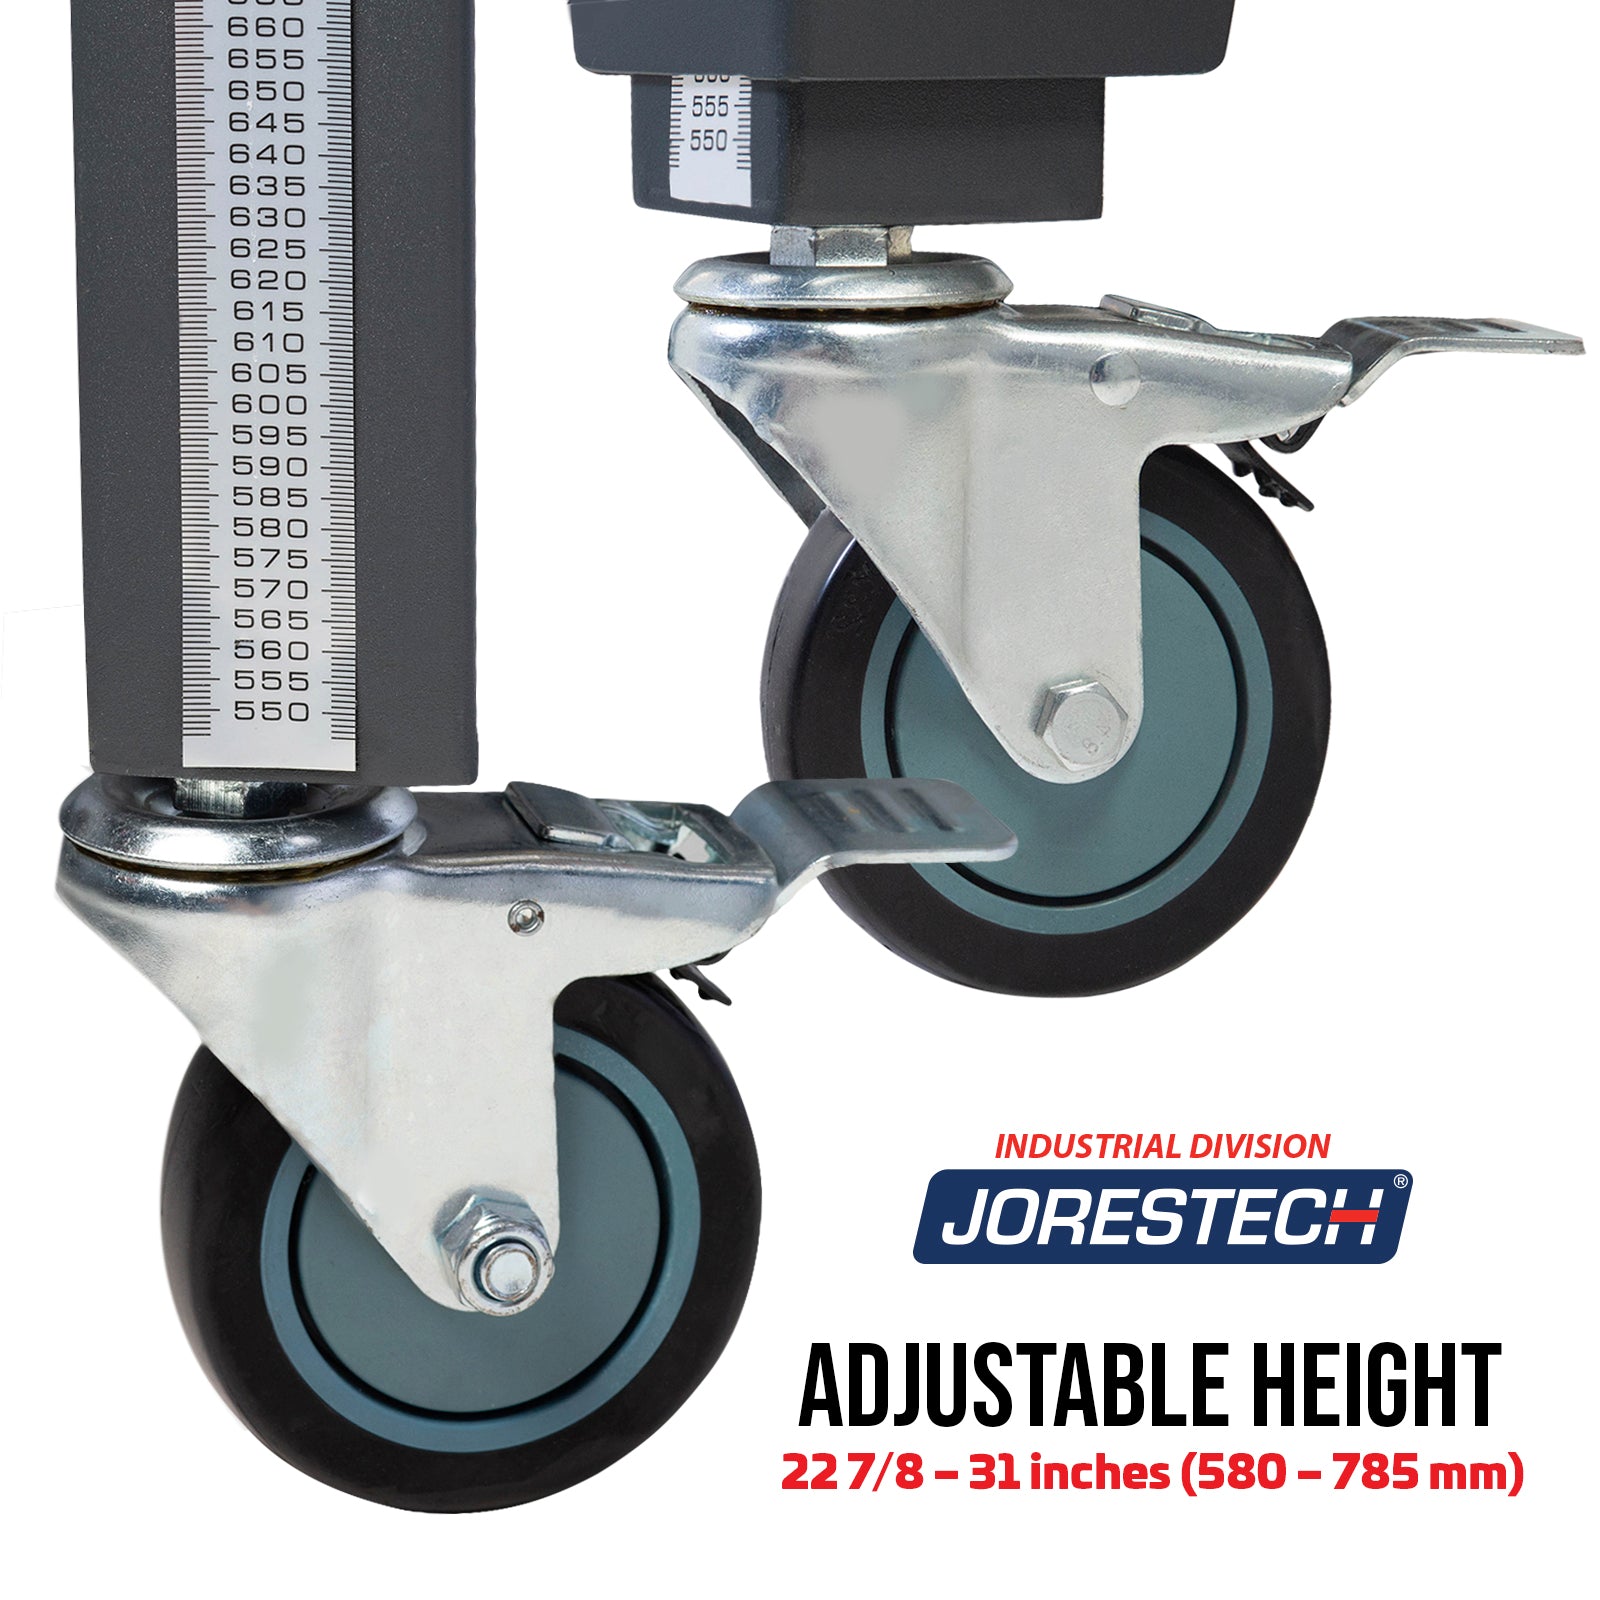 close up of black casters on case sealer. image shows JORES TECHNOLOGIES® logo and adjustable height measurements.